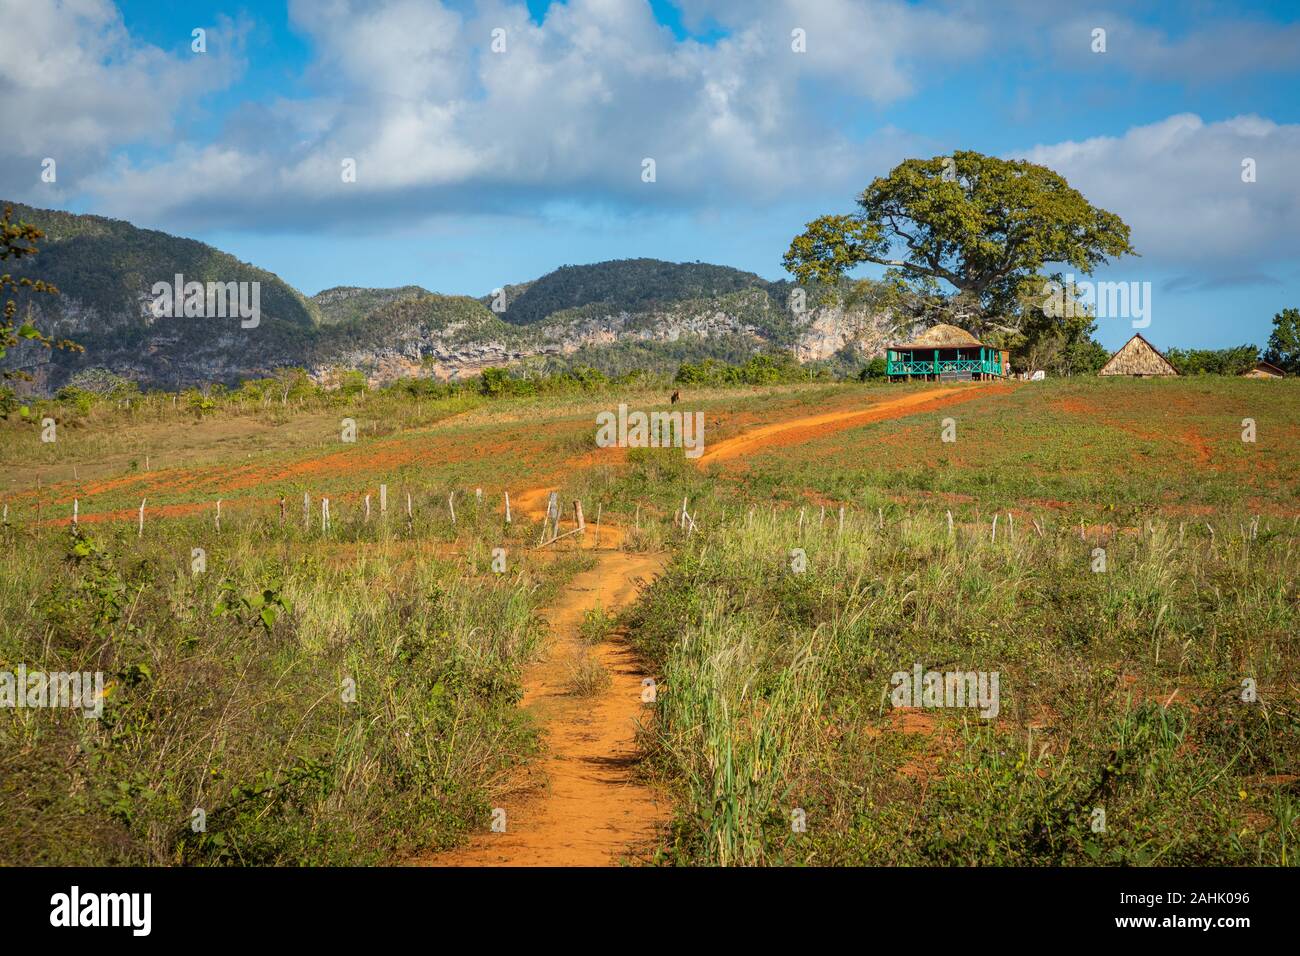 Vinales Valley. Typical view of Valle de Vinales with farm and mogotes. Pinar del Rio Province, Cuba. Stock Photo